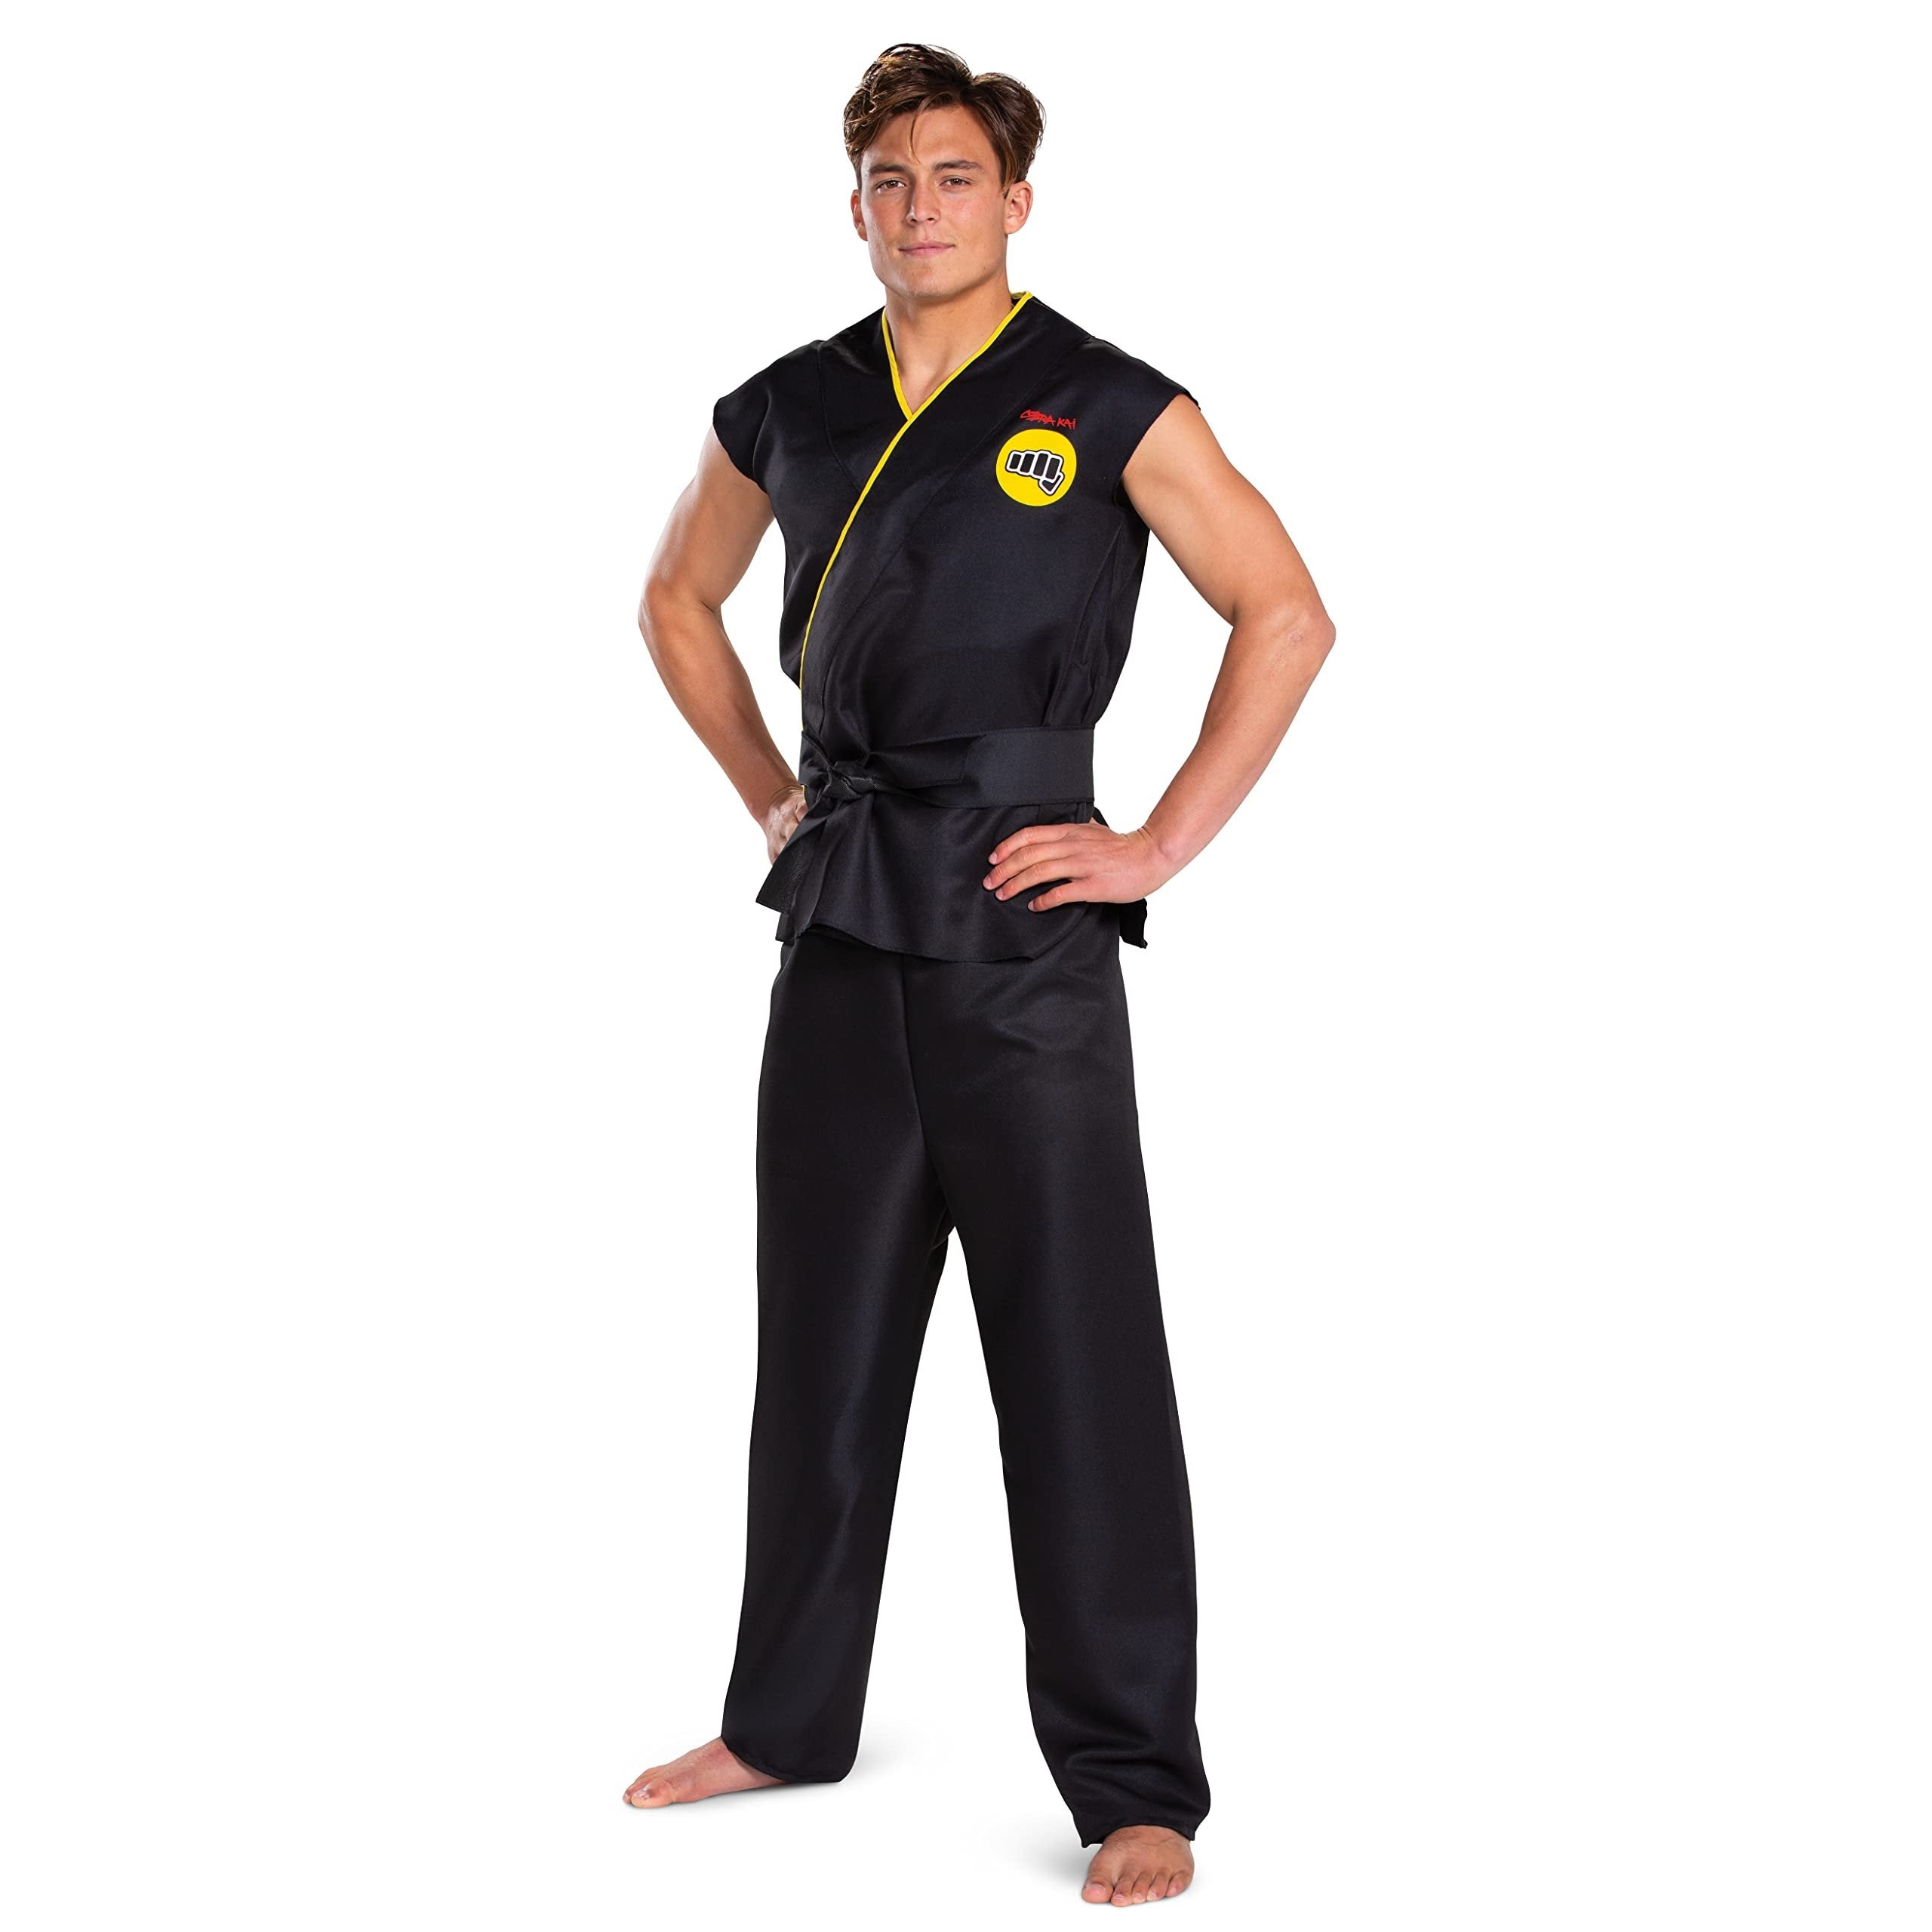 Disguise Men's Costume, Official Cobra Kai Gi for with Black Belt, Shown, Adult Size Small/Medium